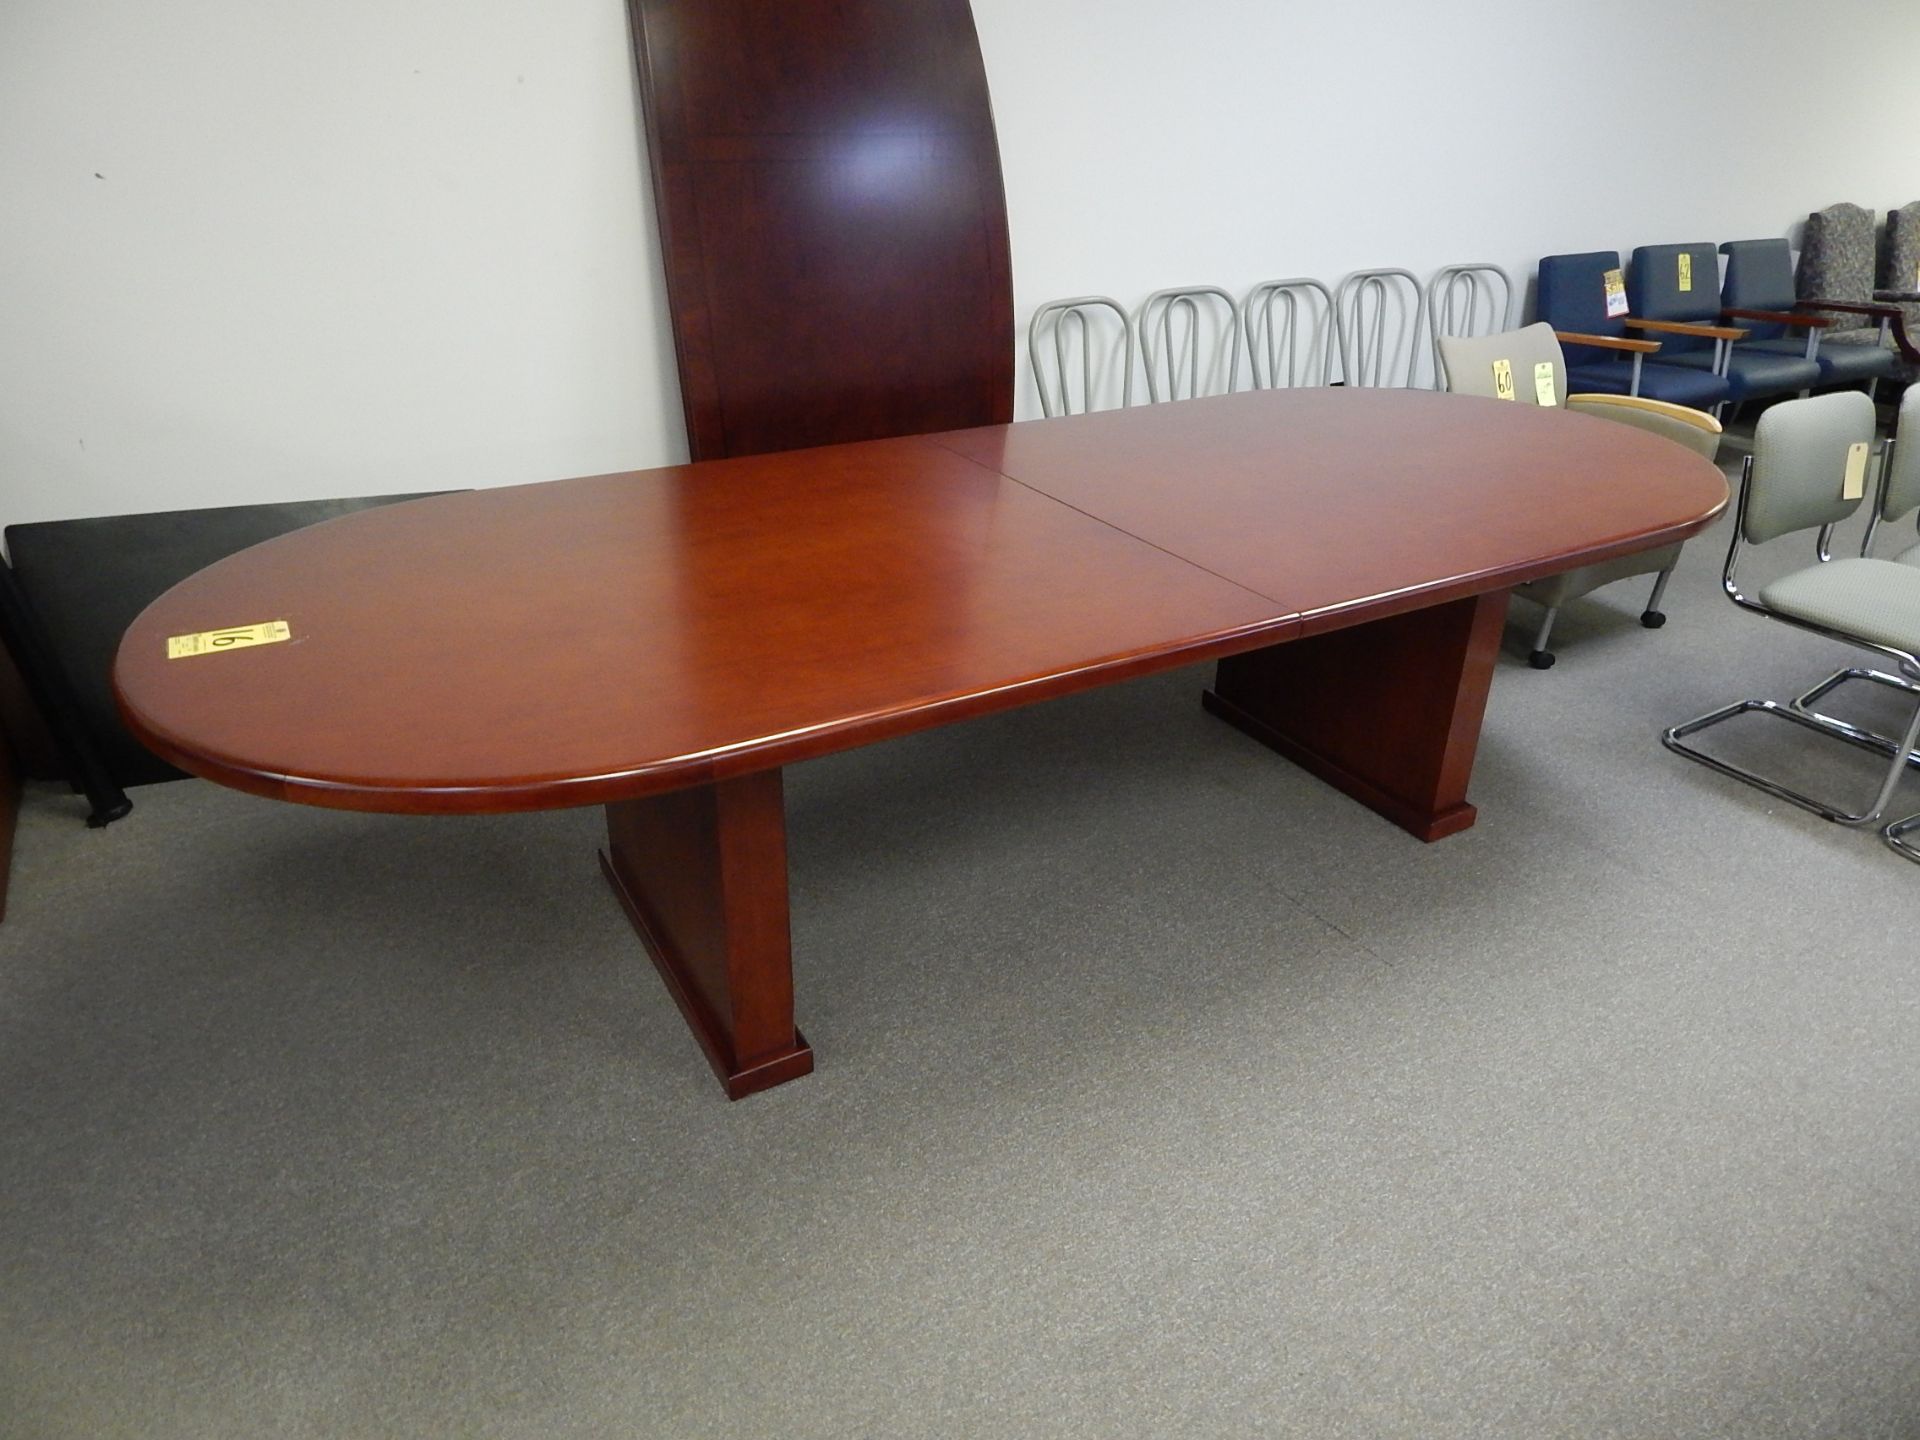 DMI 10' Oval Conference Room Table